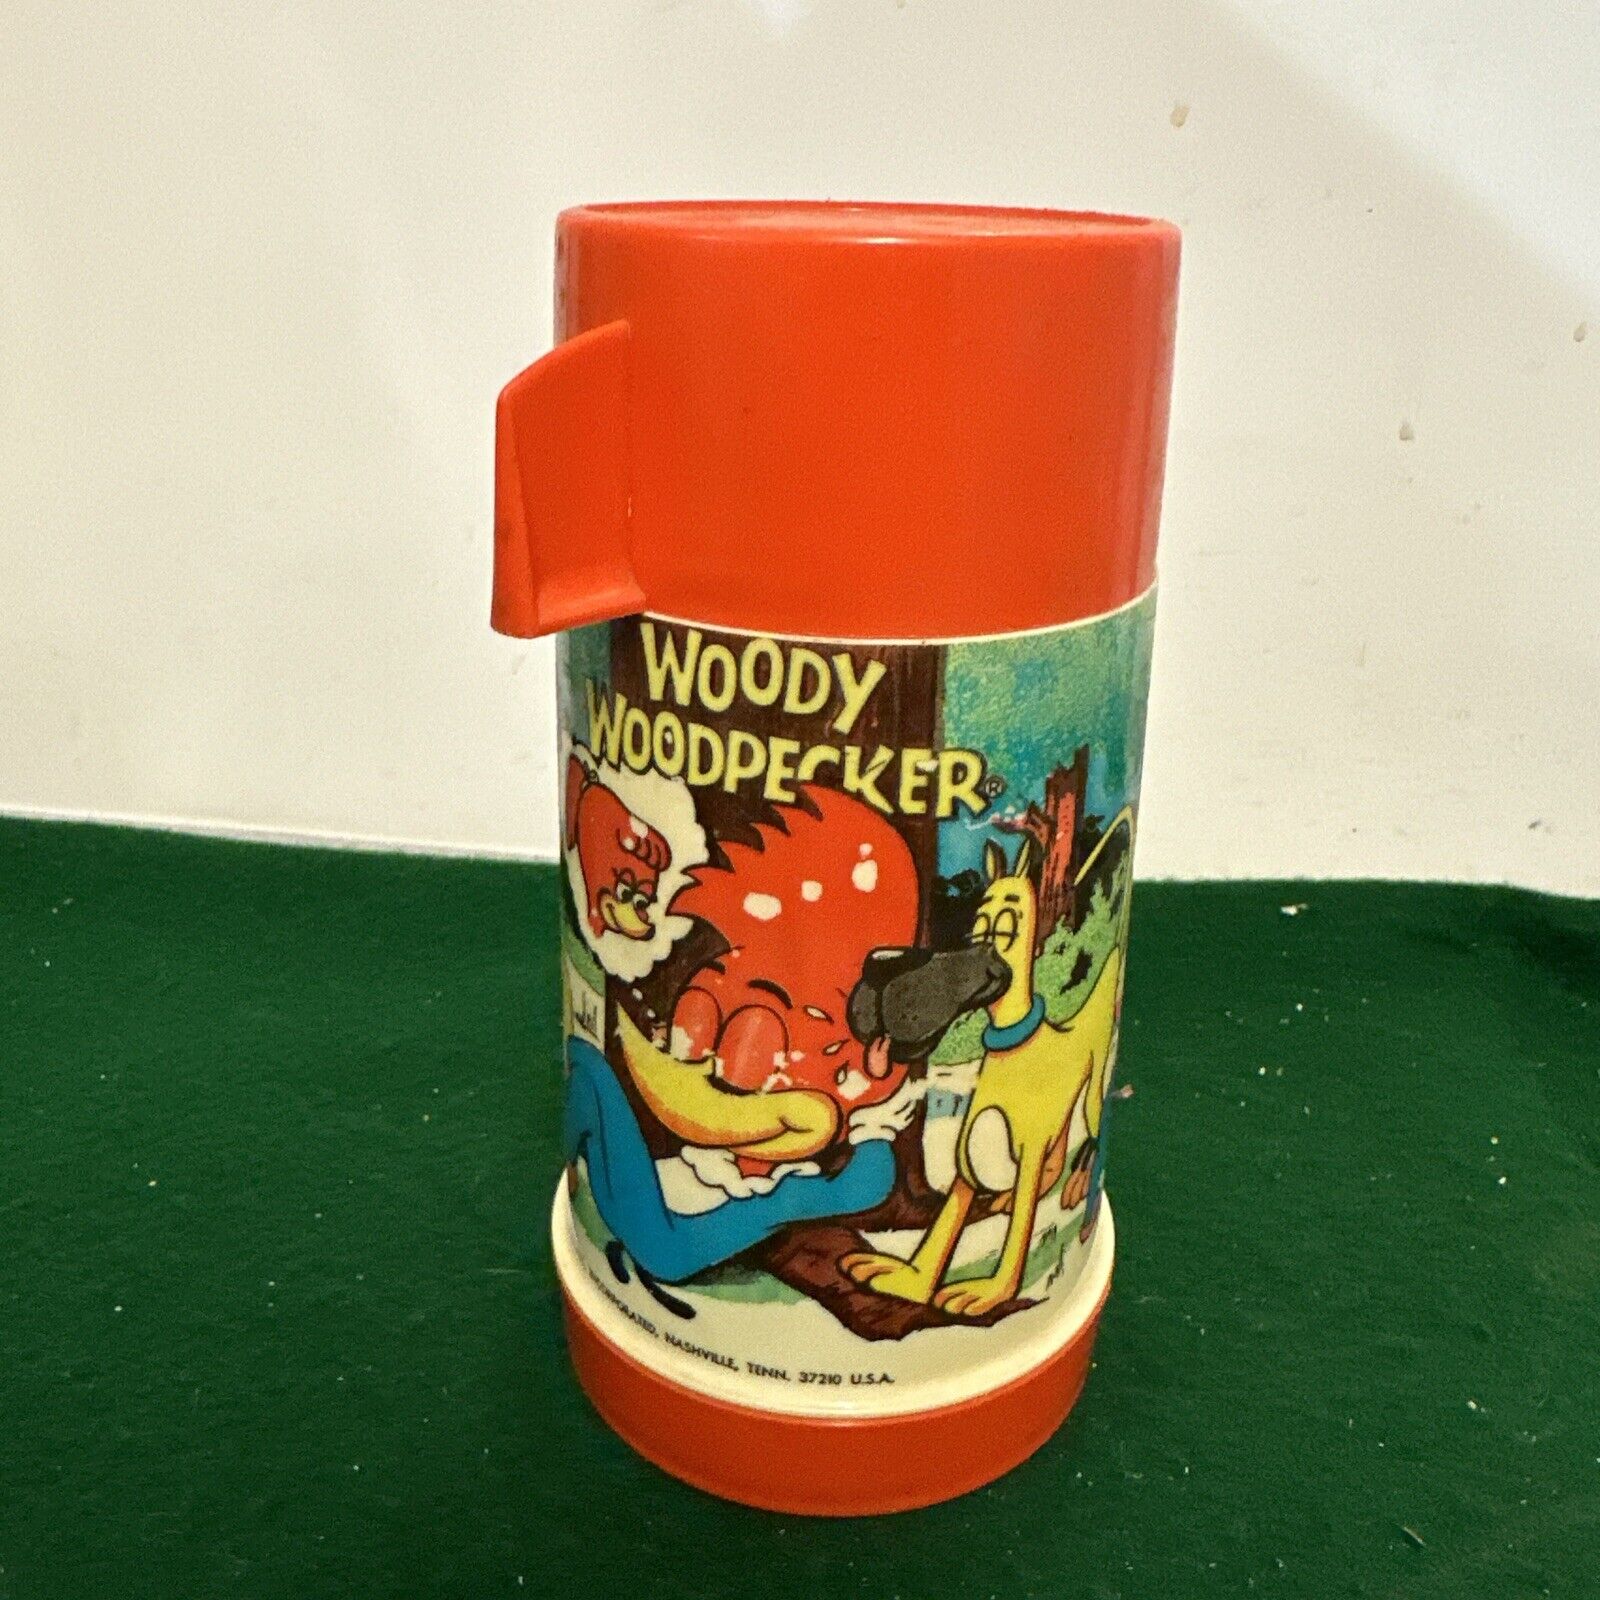 1972 Woody Woodpecker Thermos for Lunch Box Vintage Lunchbox Bottle